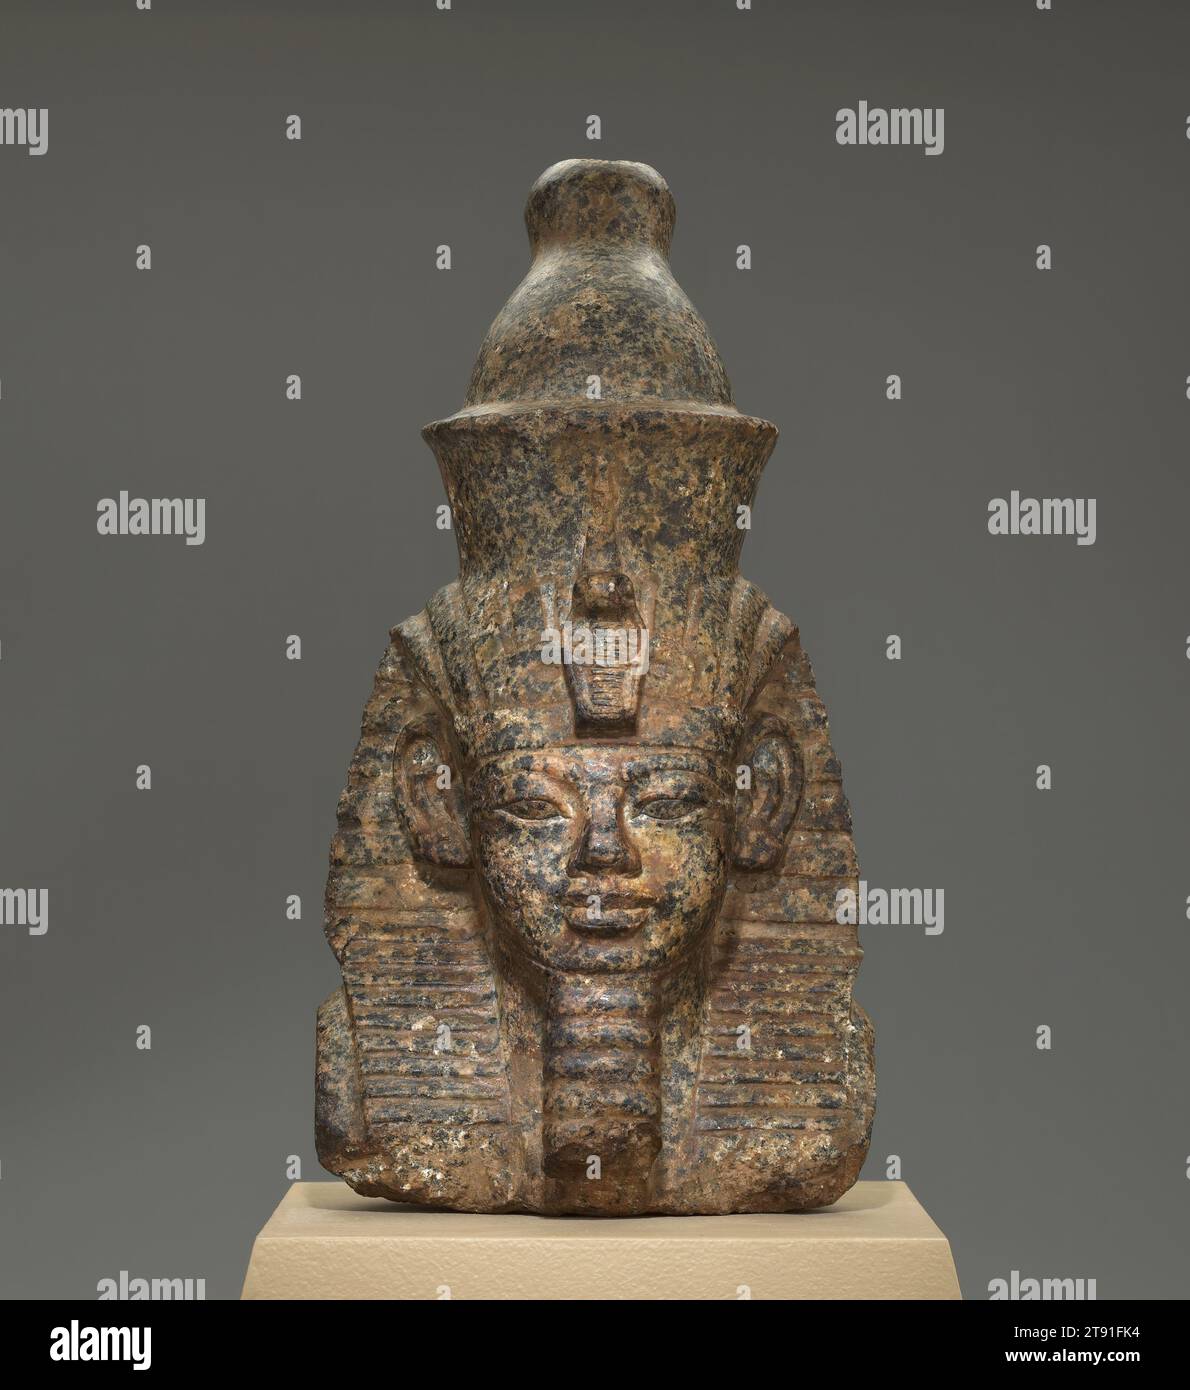 Portrait of Pharaoh Amenhotep III, 1391-1353 BCE, 10 3/8 x 6 x 5 in. (26.35 x 15.24 x 12.7 cm), Granodiorite, Egypt, 15th-14th century BCE, 'Amenhotep the Magnificent' is pharaoh Amenhotep III’s epithet, and it says it all. In the 1300s BCE he ruled an empire that stretched from northern Syria to Sudan, an area roughly the size of Alaska, Texas, and Wisconsin combined. His 38-year rule was a period of political, economic, and cultural prosperity, and he commissioned numerous carved portraits of himself; these varied in height from 60 feet to a couple of inches. Stock Photo